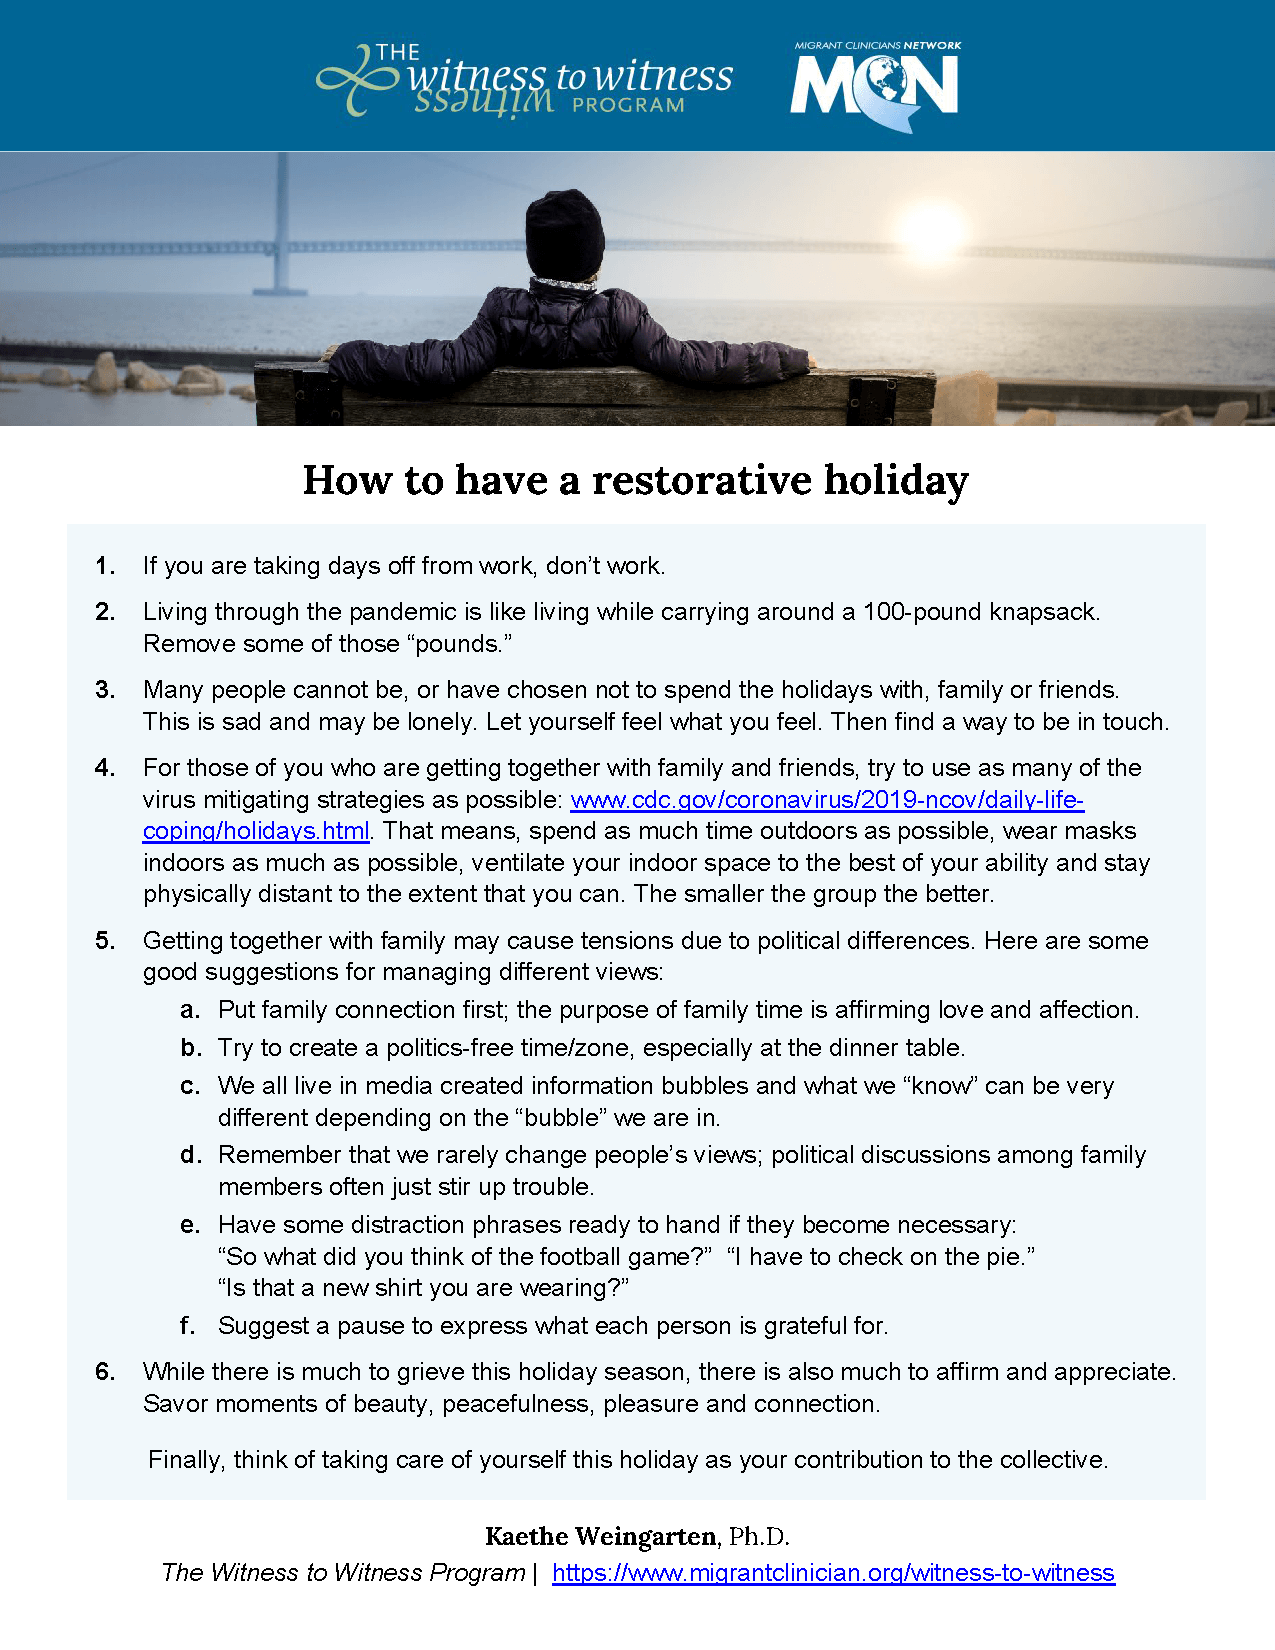 How to Have a Restorative Holiday